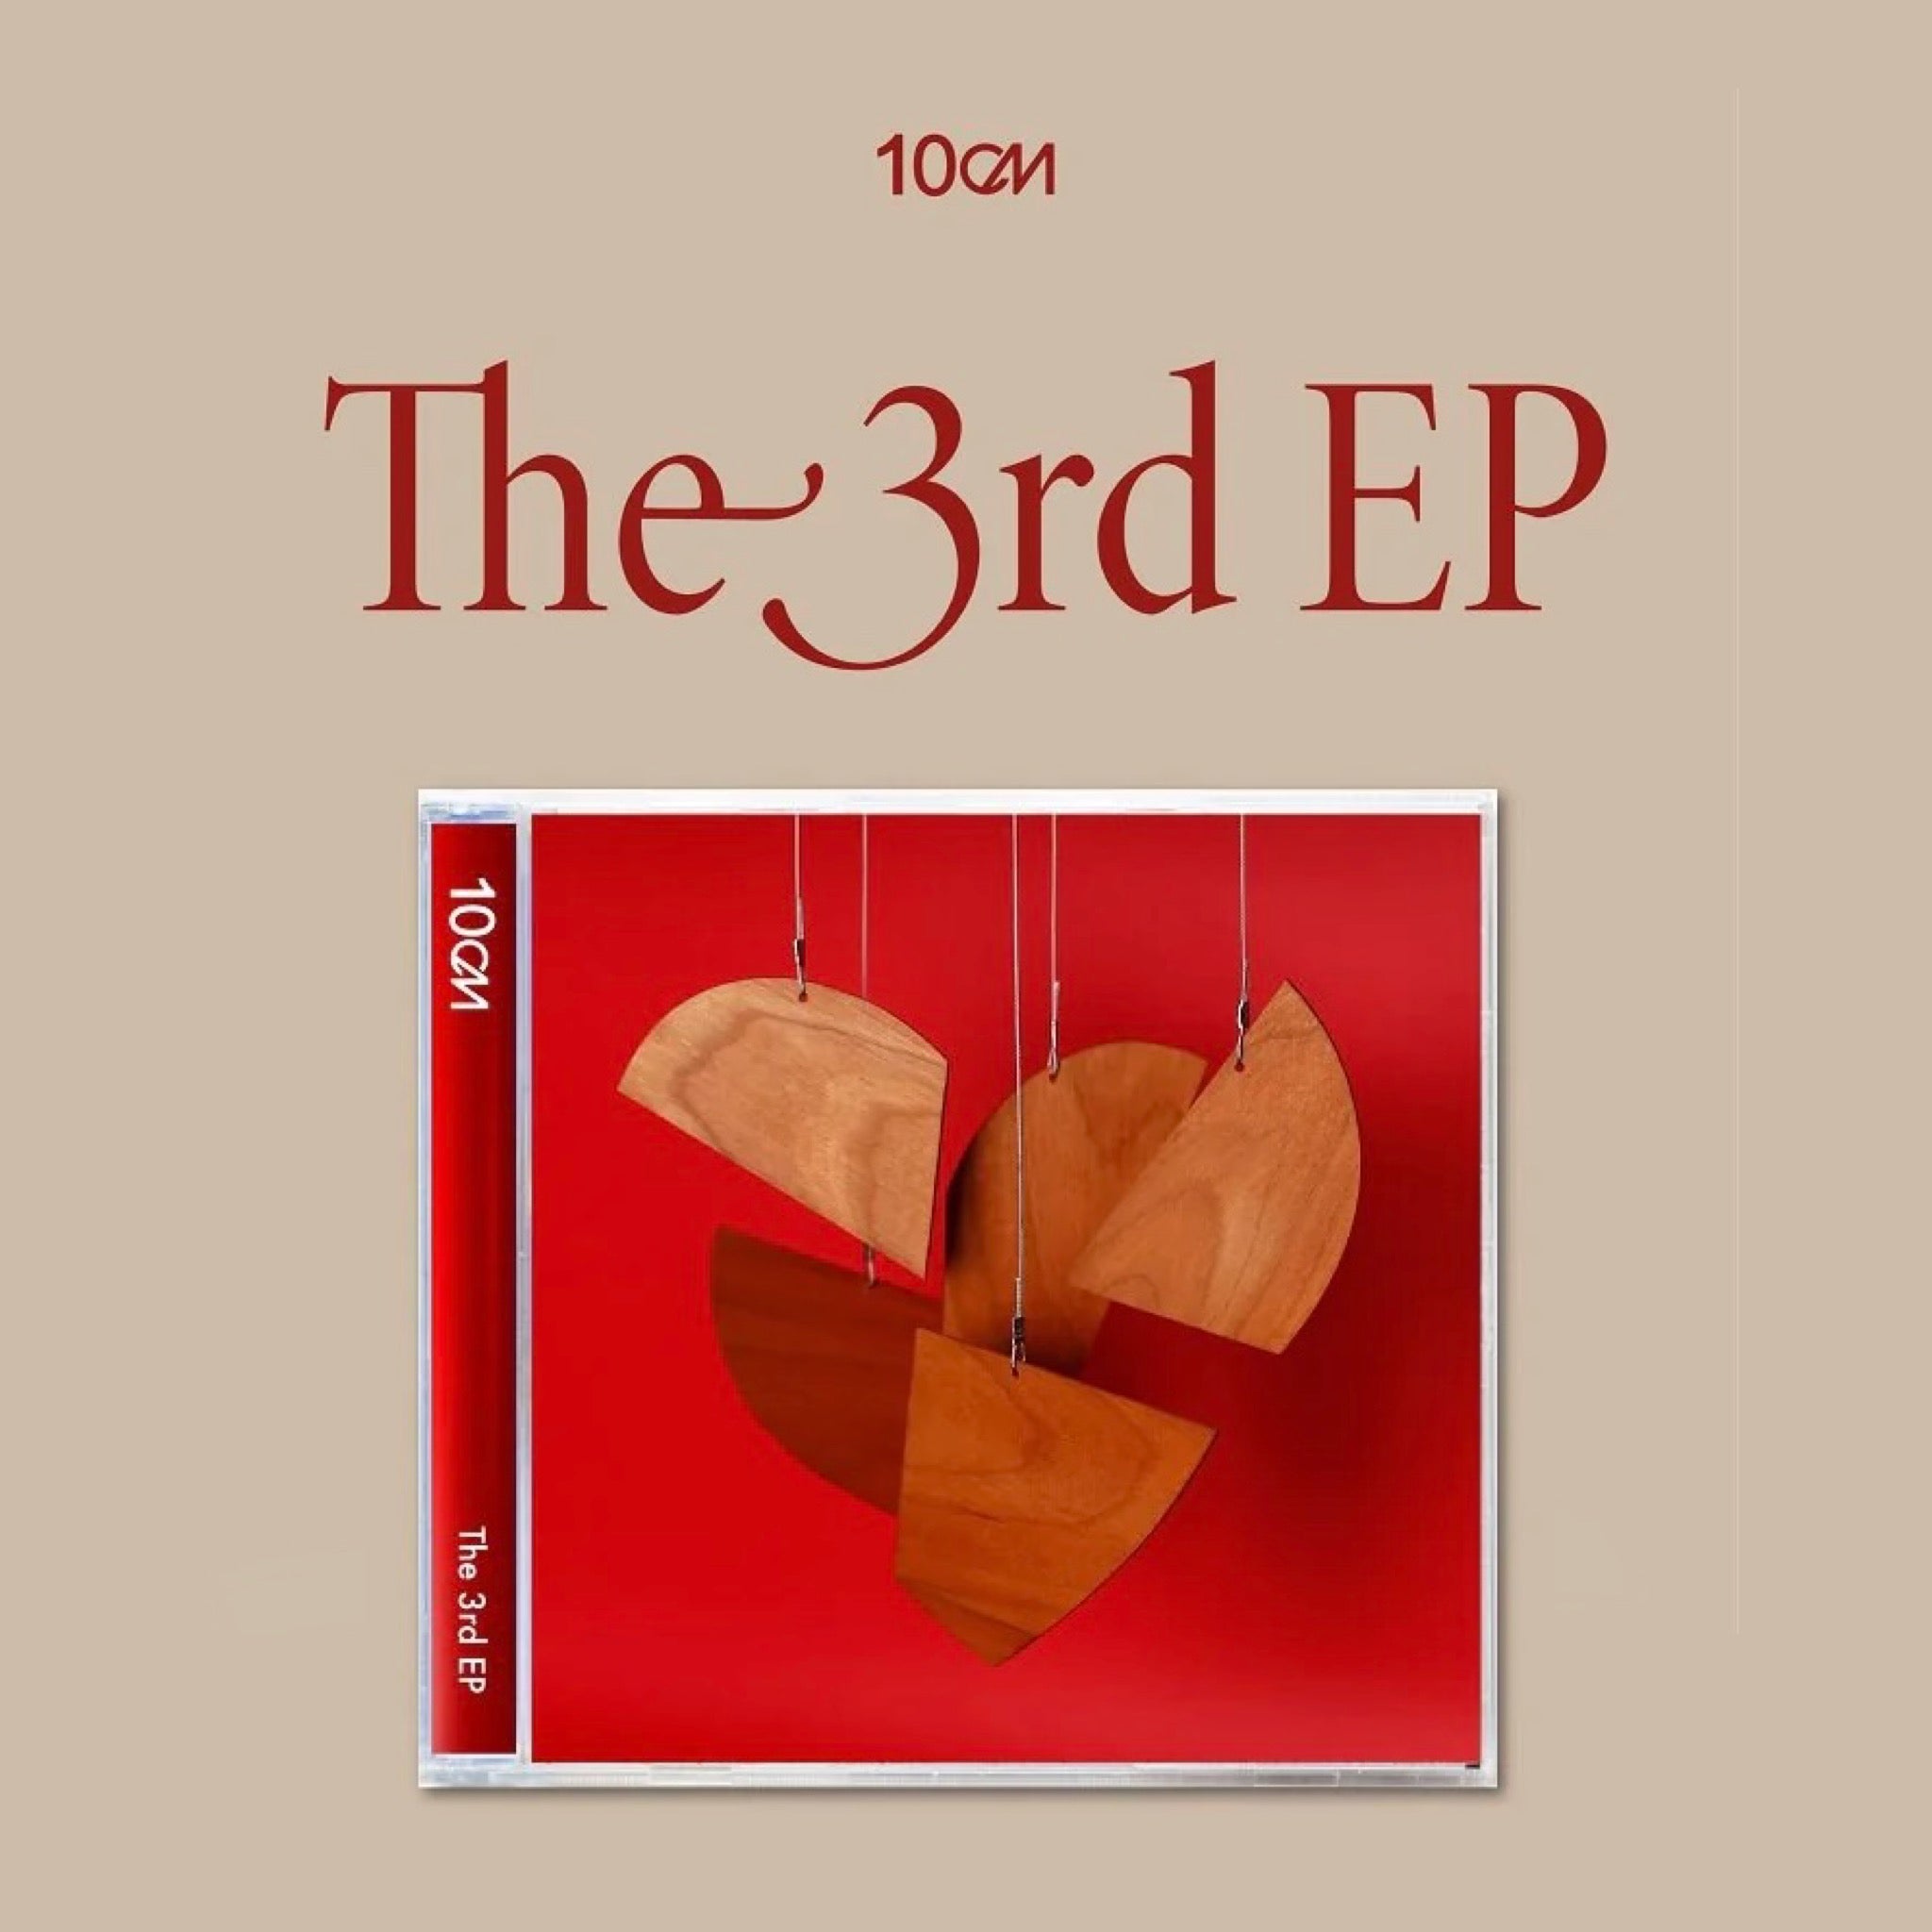 10CM - THE 3RD EP